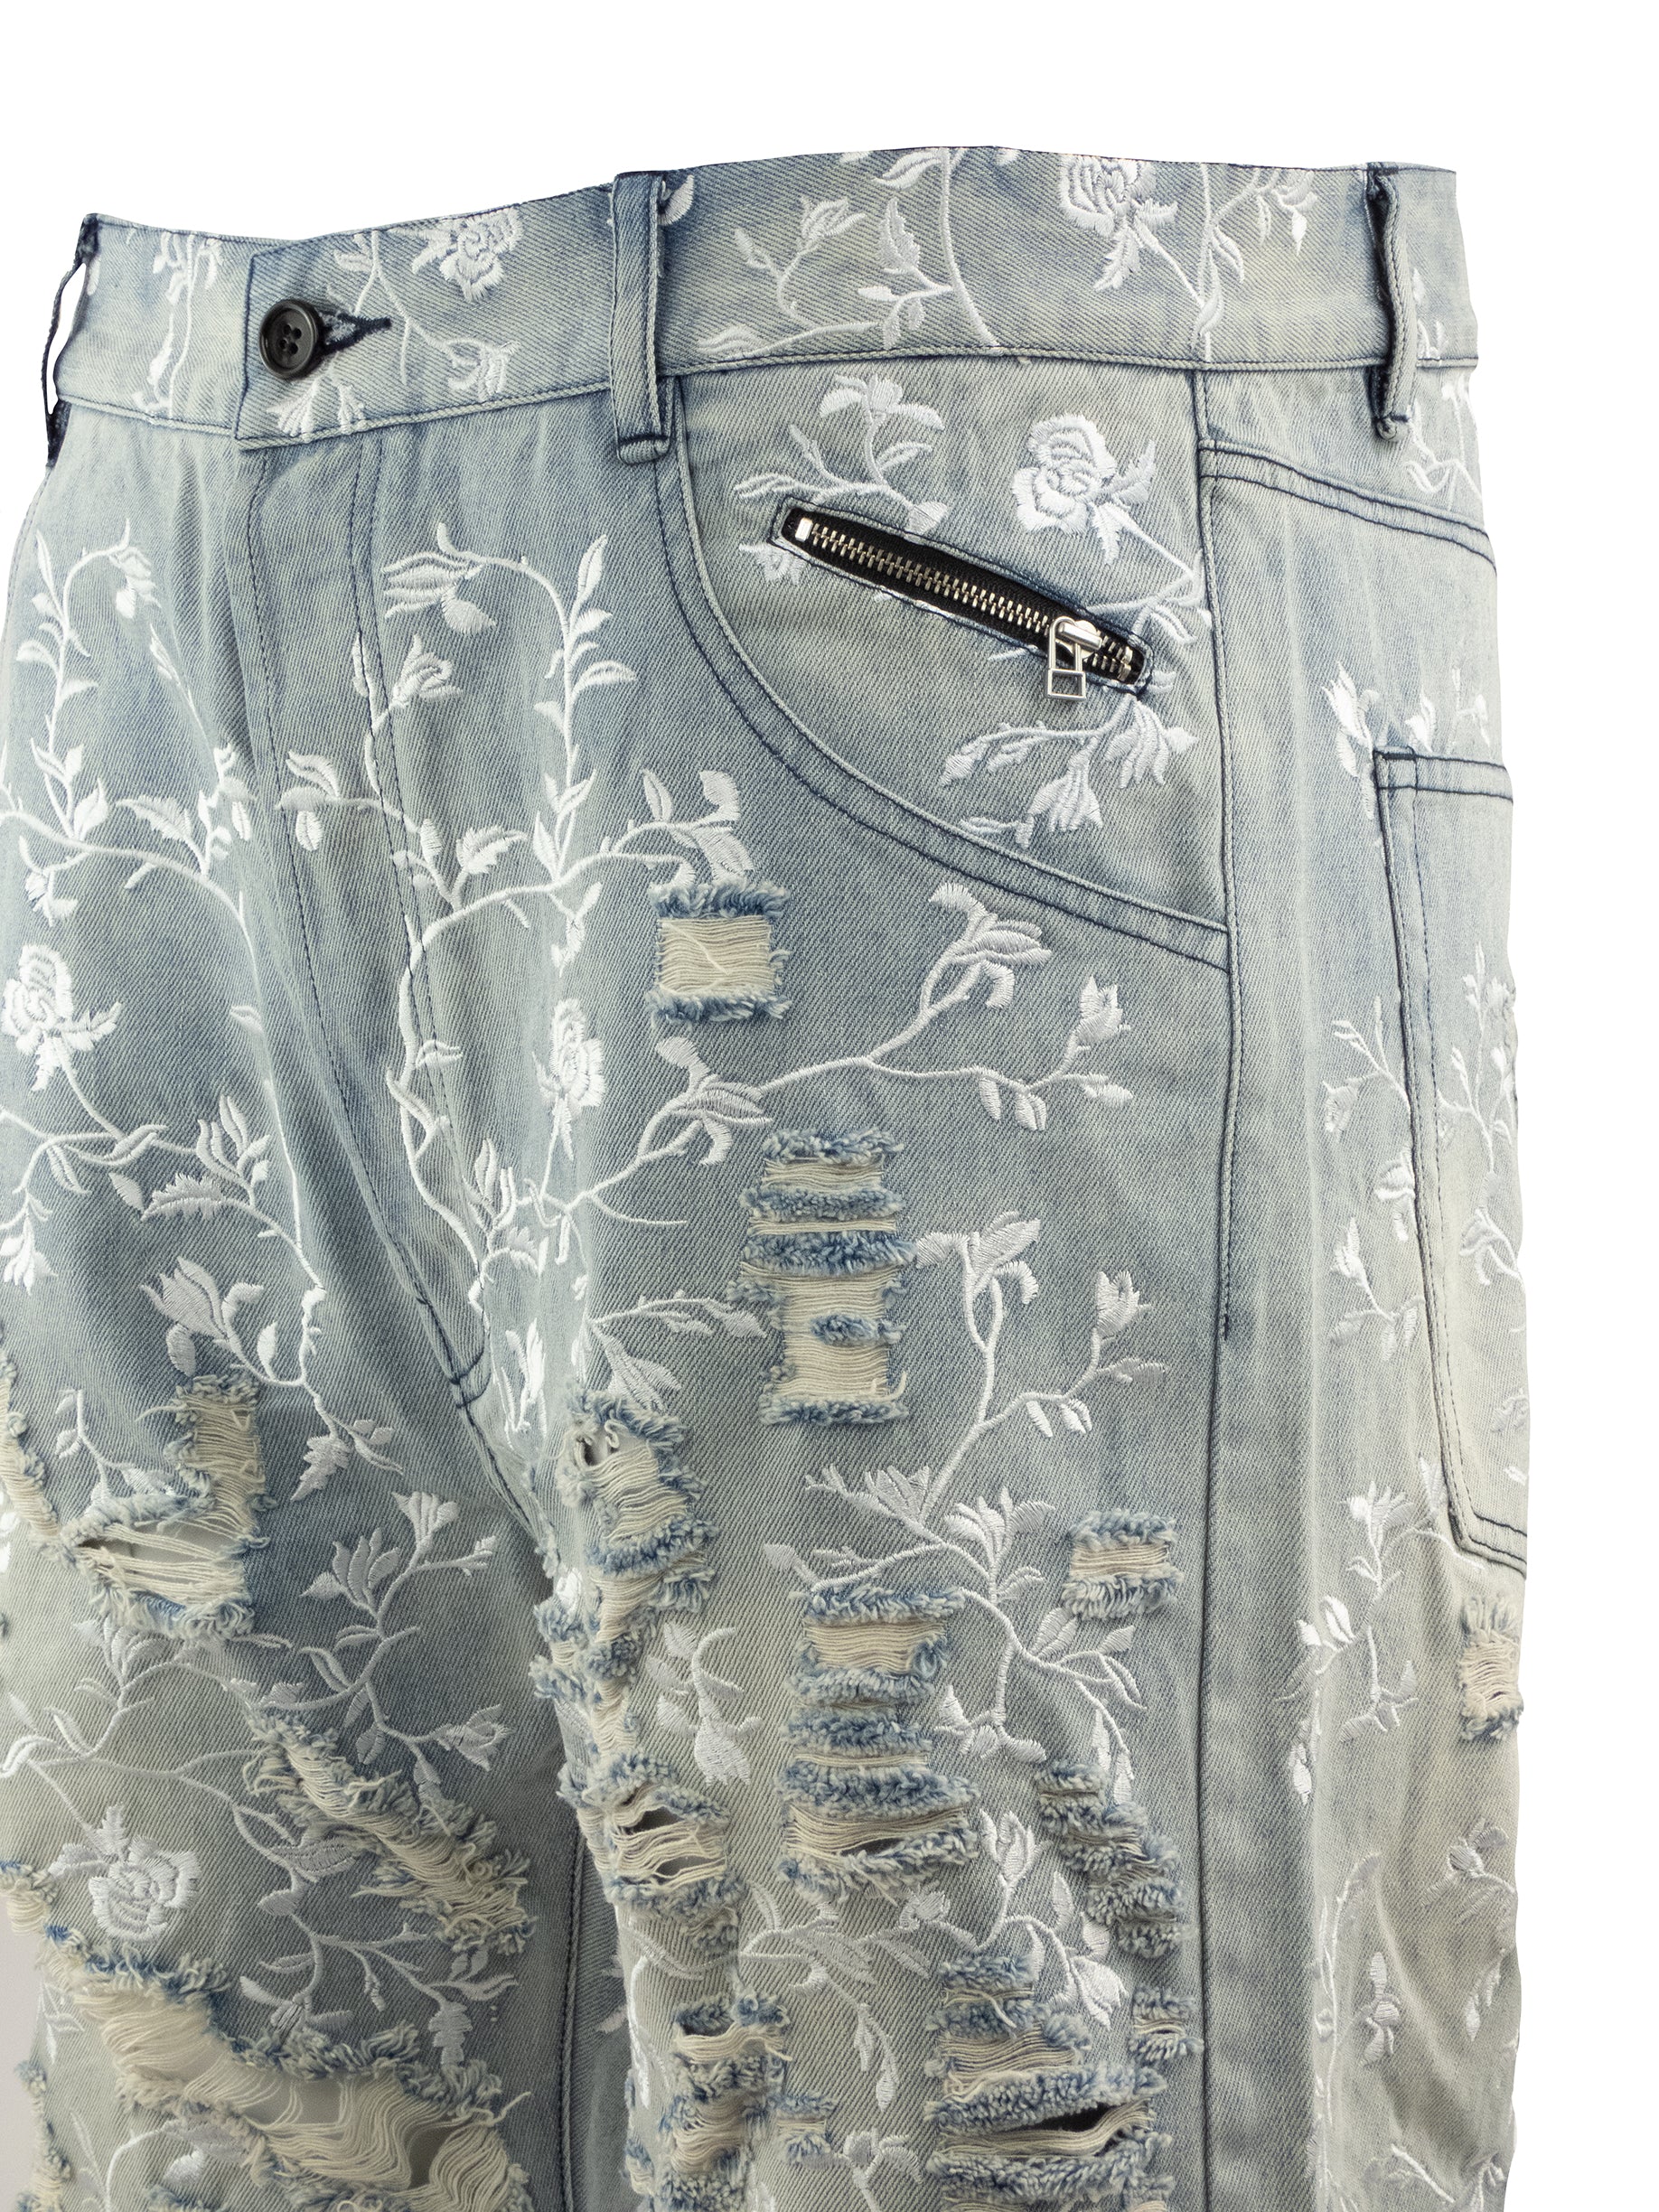 WHITE FLORAL RIPPED DENIM JEANS WITH ZIP POCKETS